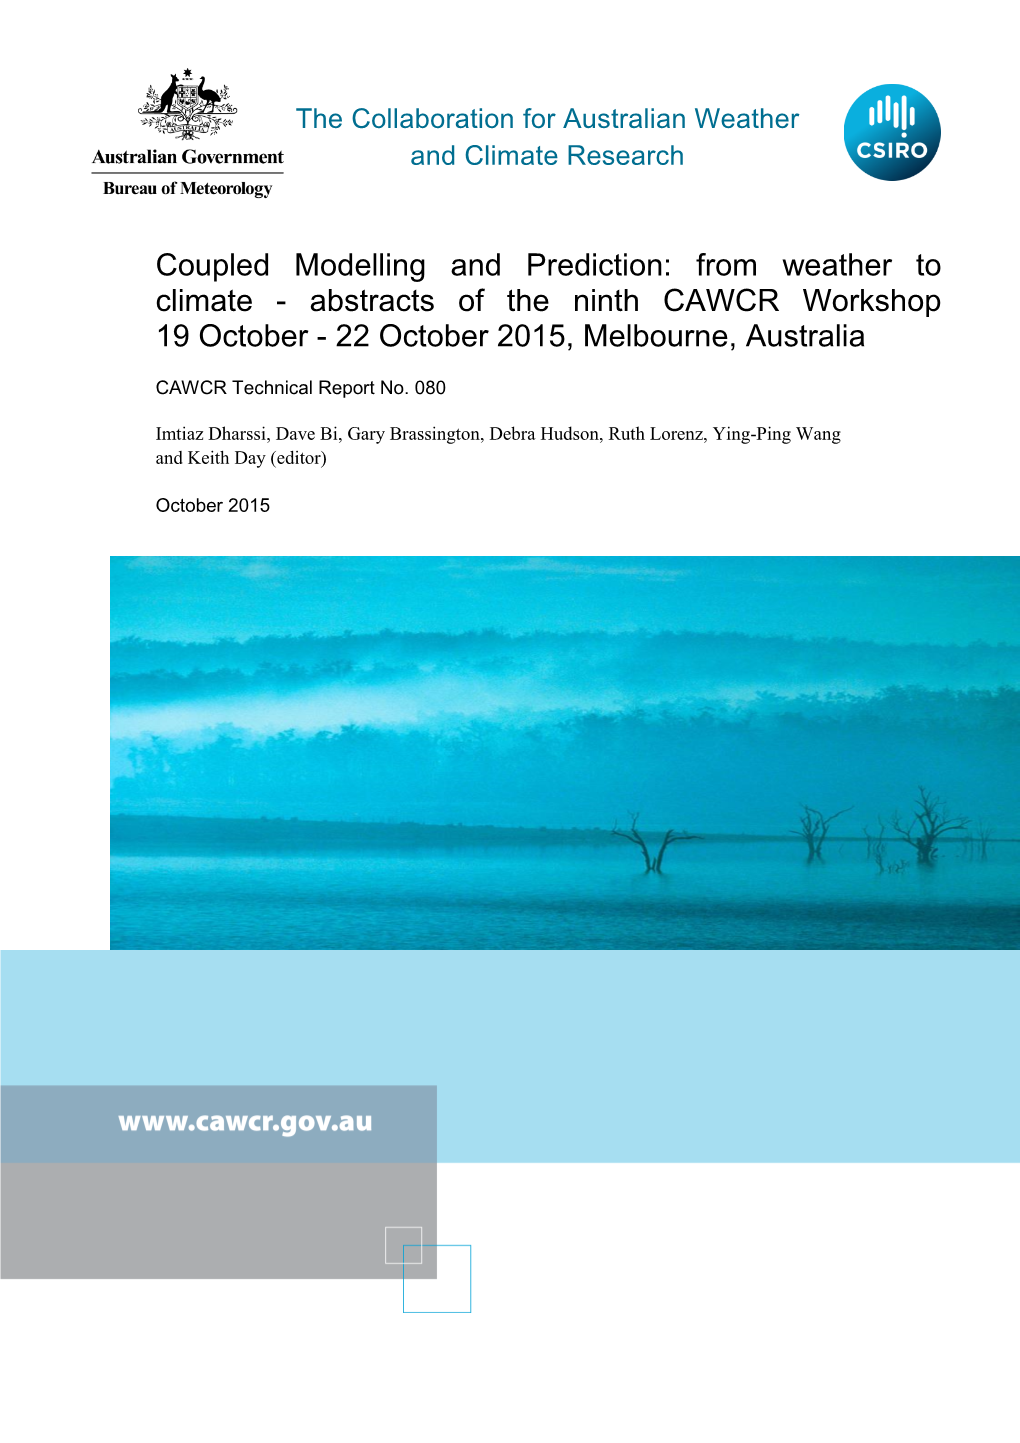 Coupled Modelling and Prediction: from Weather to Climate - Abstracts of the Ninth CAWCR Workshop 19 October - 22 October 2015, Melbourne, Australia